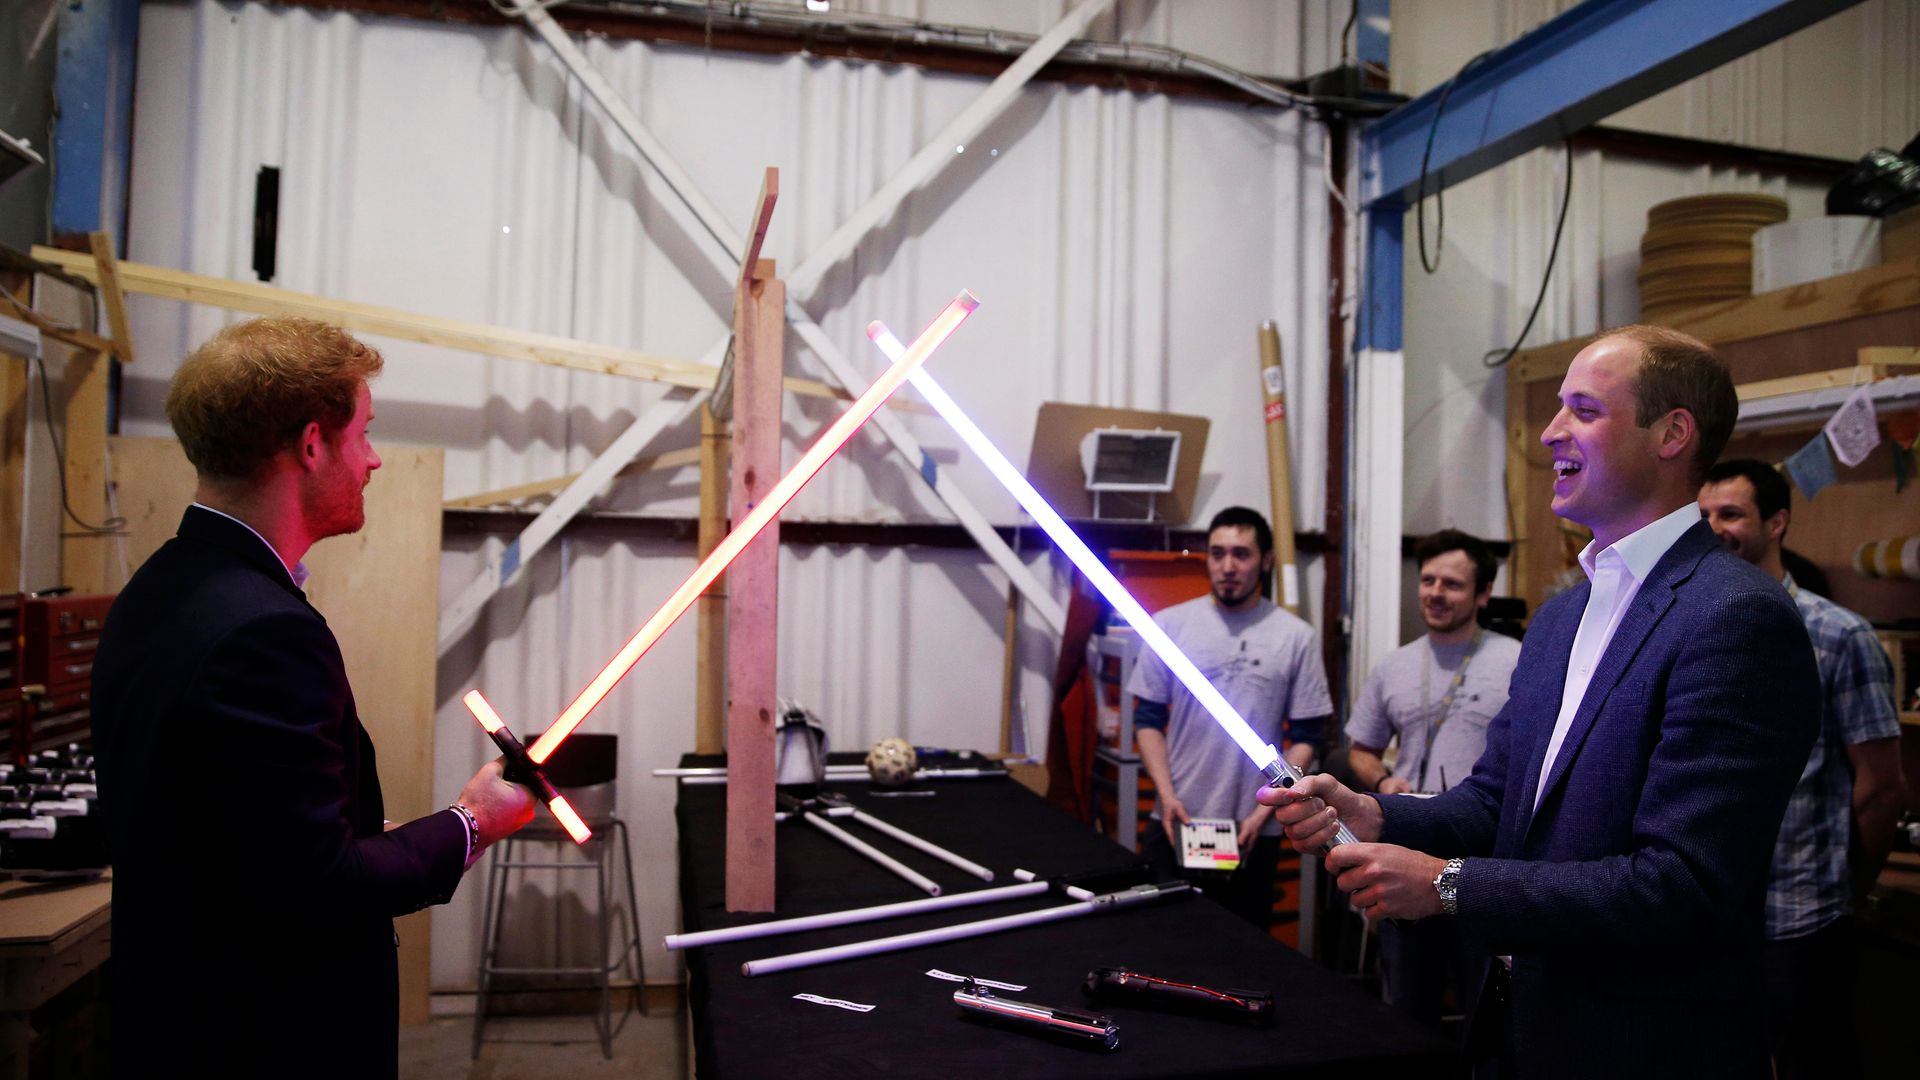 Prince WIlliam and Prince Harry duelling with lightsabers